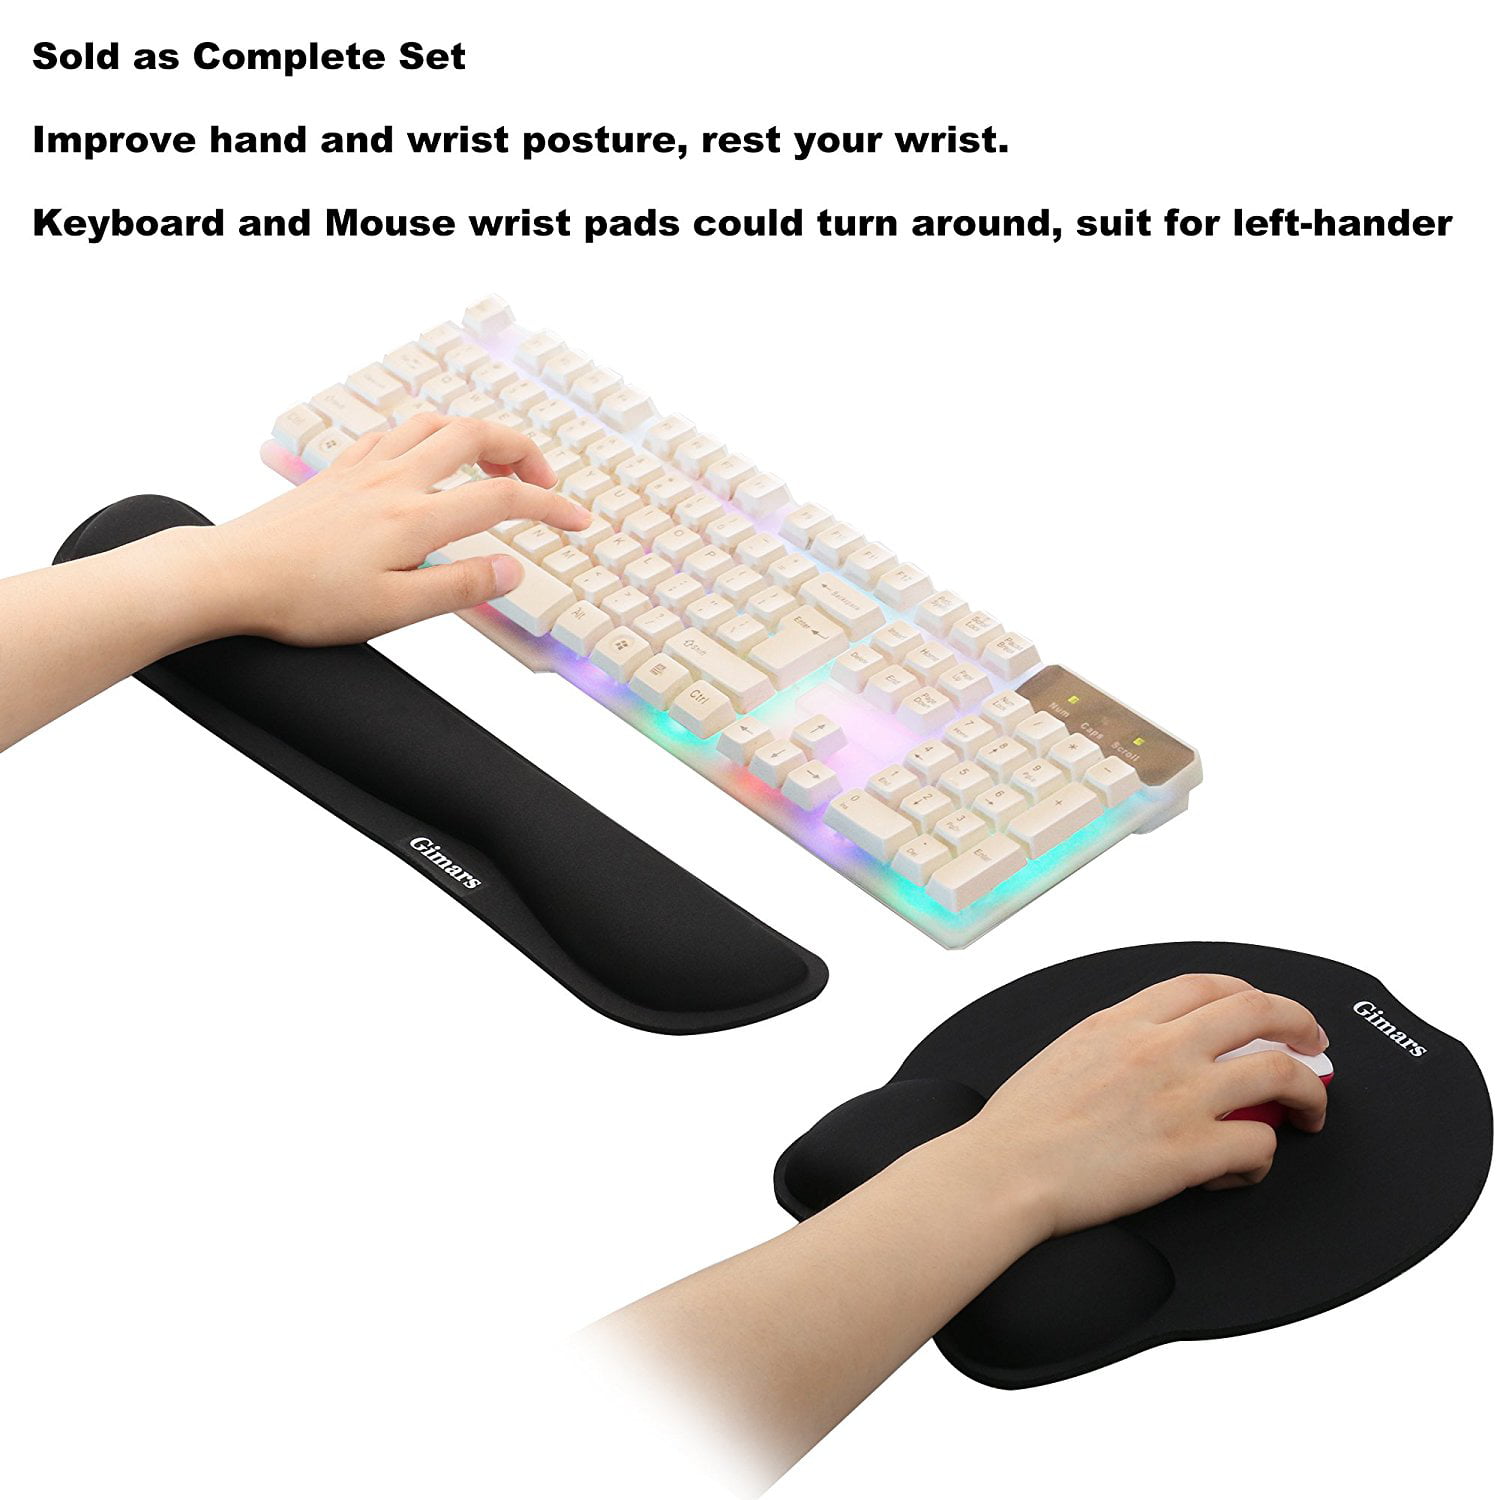 Blue RANDAR Mouse Pad with Wrist Support Keyboard Wrist Rest Set Ergonomic Design Large Mouse Pad with Anti-Slip Rubber Base Premium-Textured Pain Relief for Computer Laptop Mac 